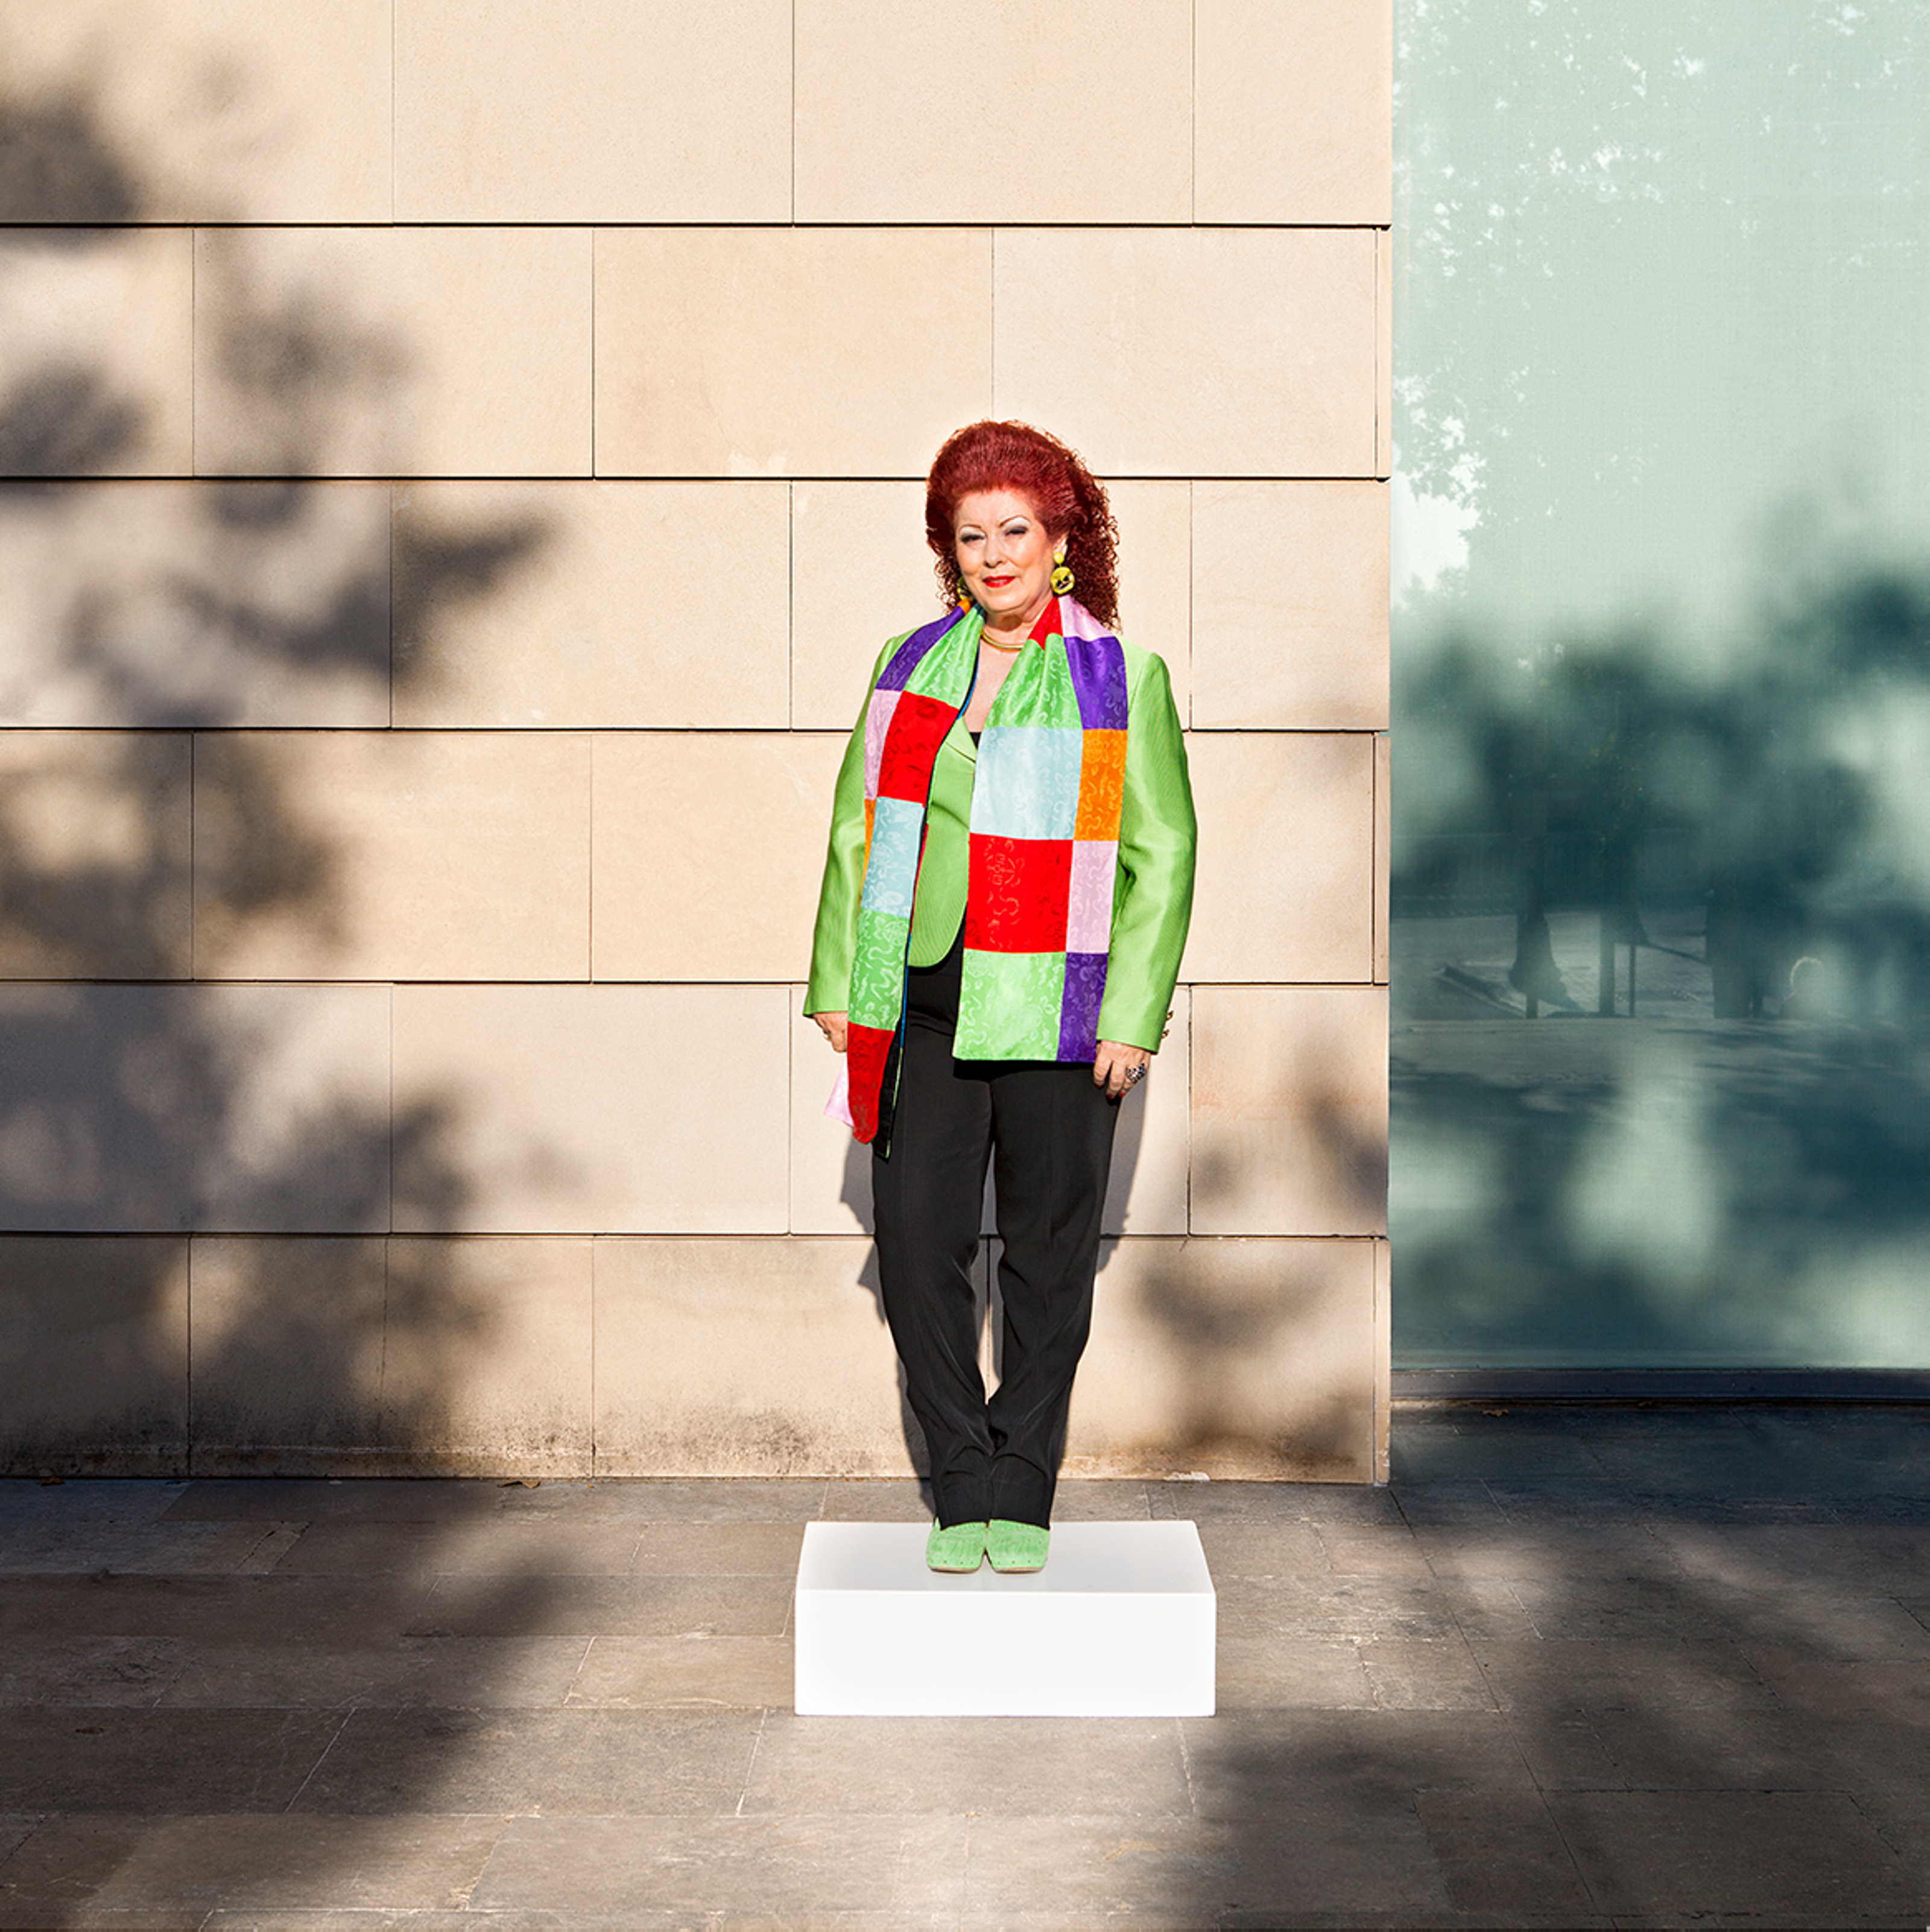 A middle-aged Consuelo Císcar with red wavy hair, green jacket and shoes, and black pants stands on a pedestal.